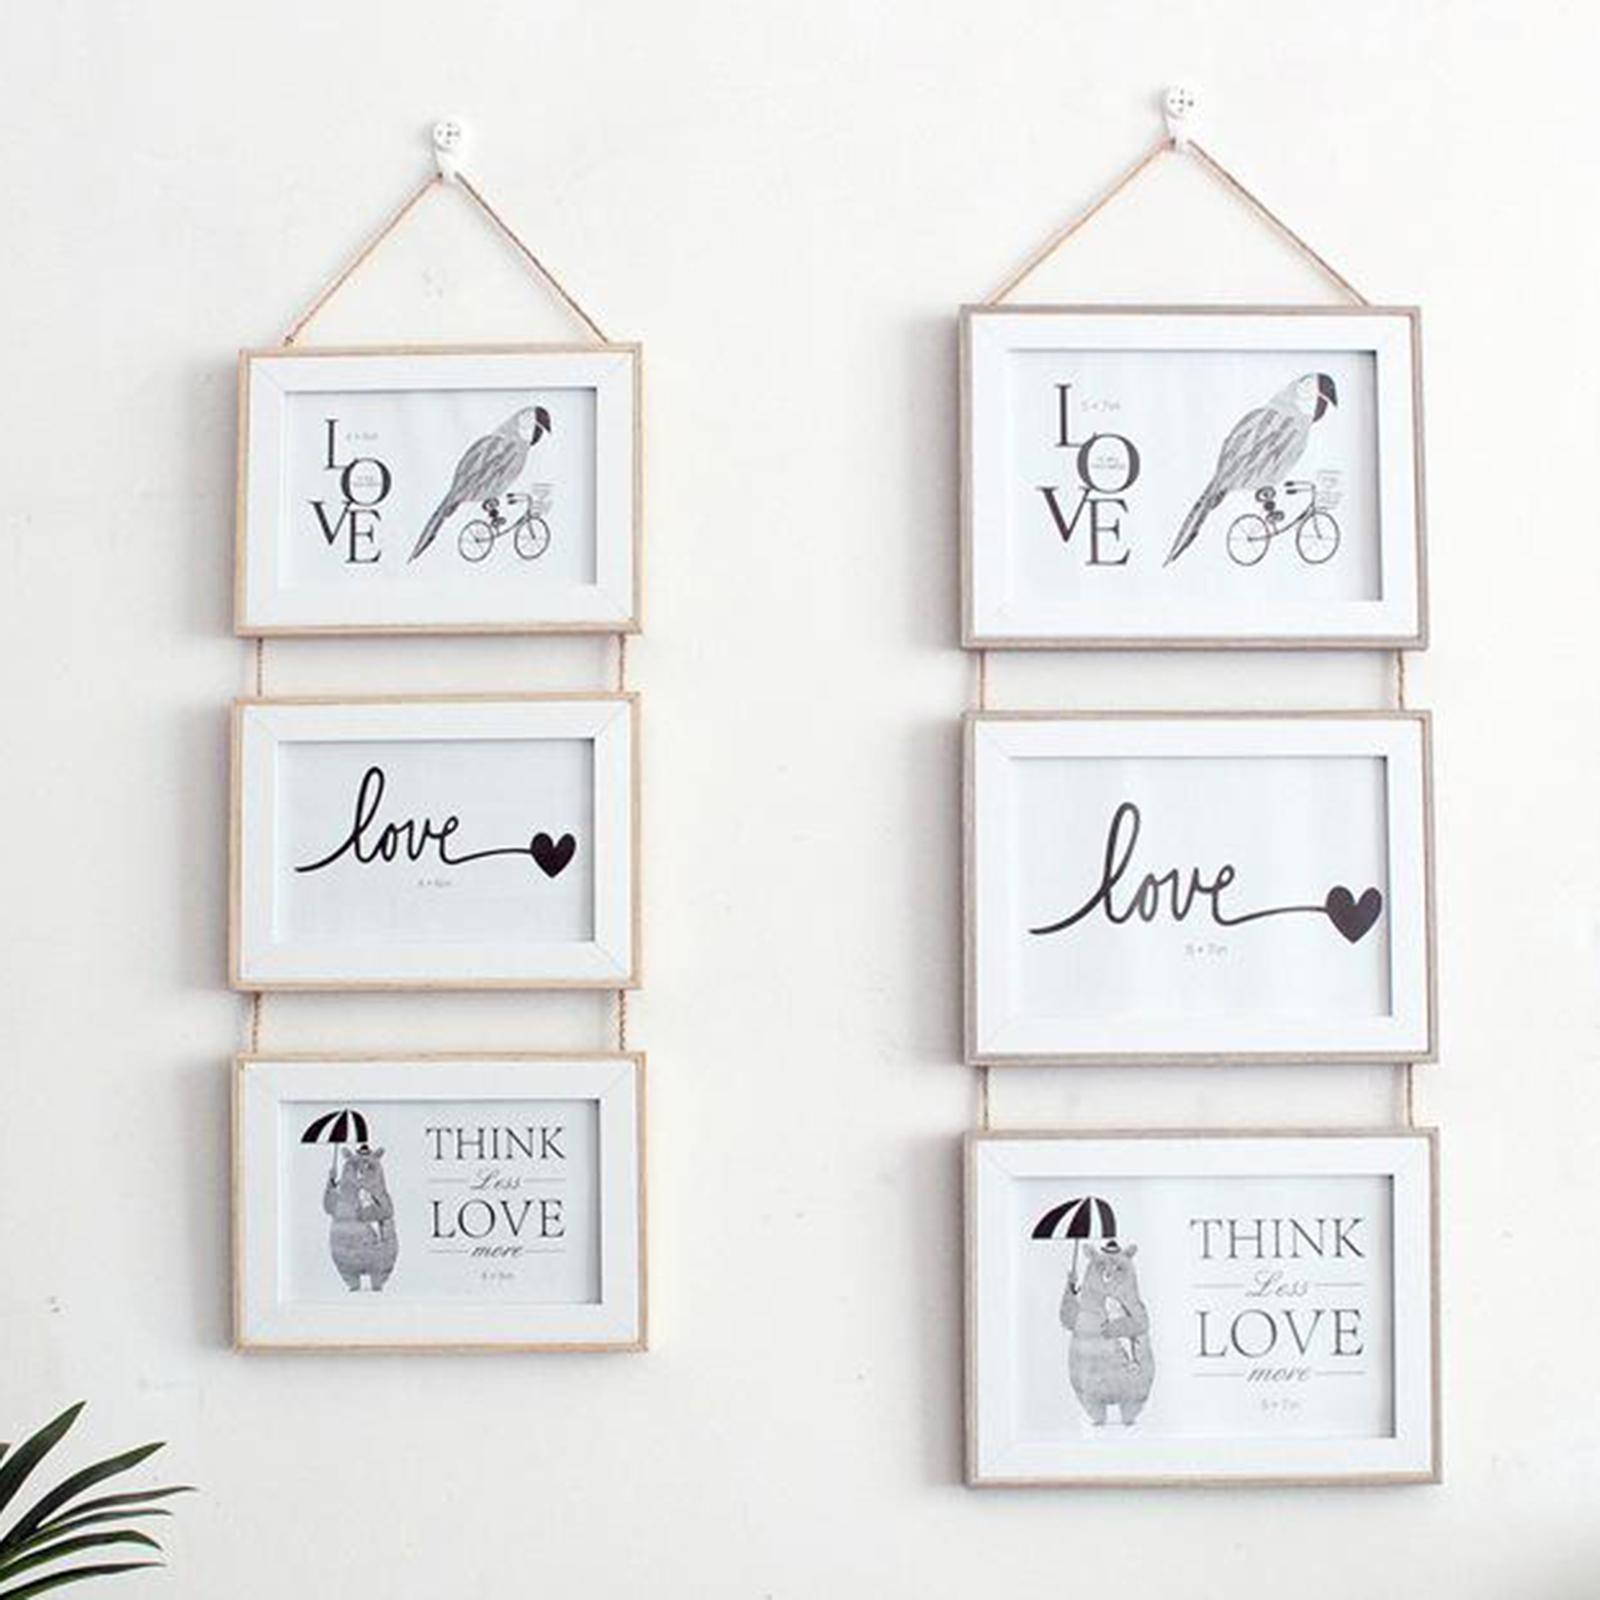 3x 4x6 inch / 5x7 inch Picture Frames for Wall Hanging 6 inch  wood color